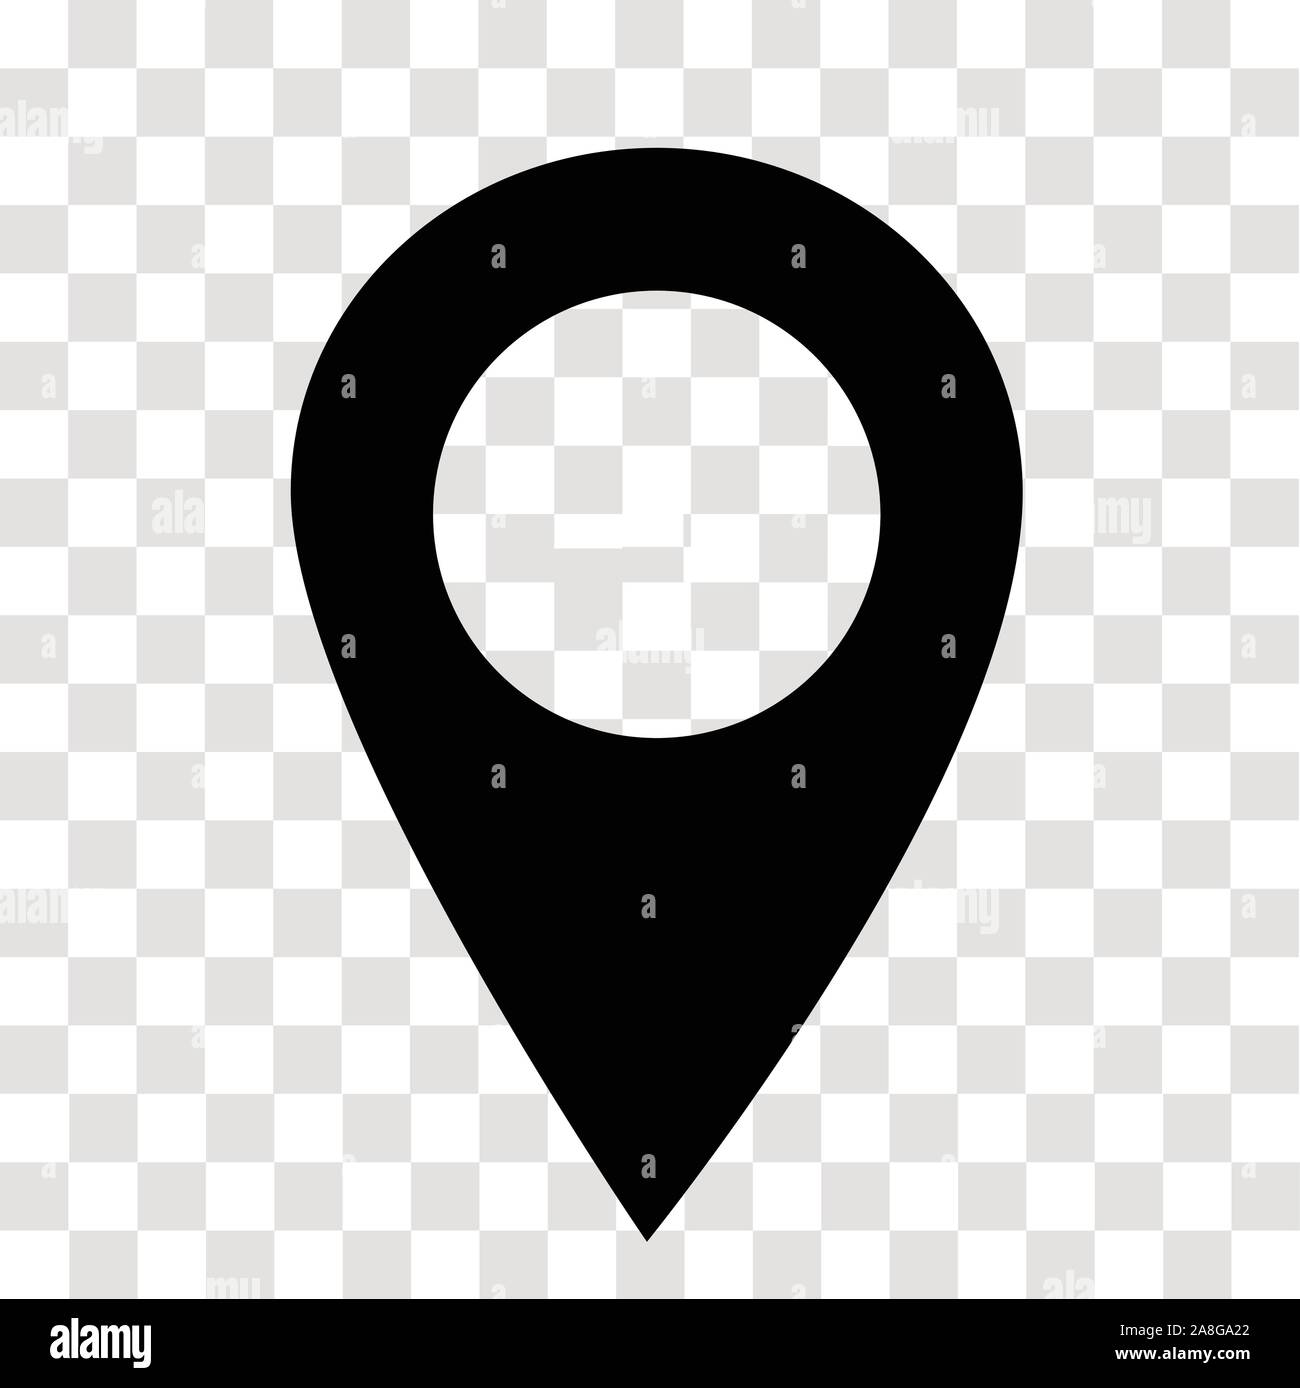 Location Pin Icon On Transparent Map Marker Sign Flat Style Map Point Symbol Map Pointer Symbol Map Pin Sign Stock Vector Image Art Alamy